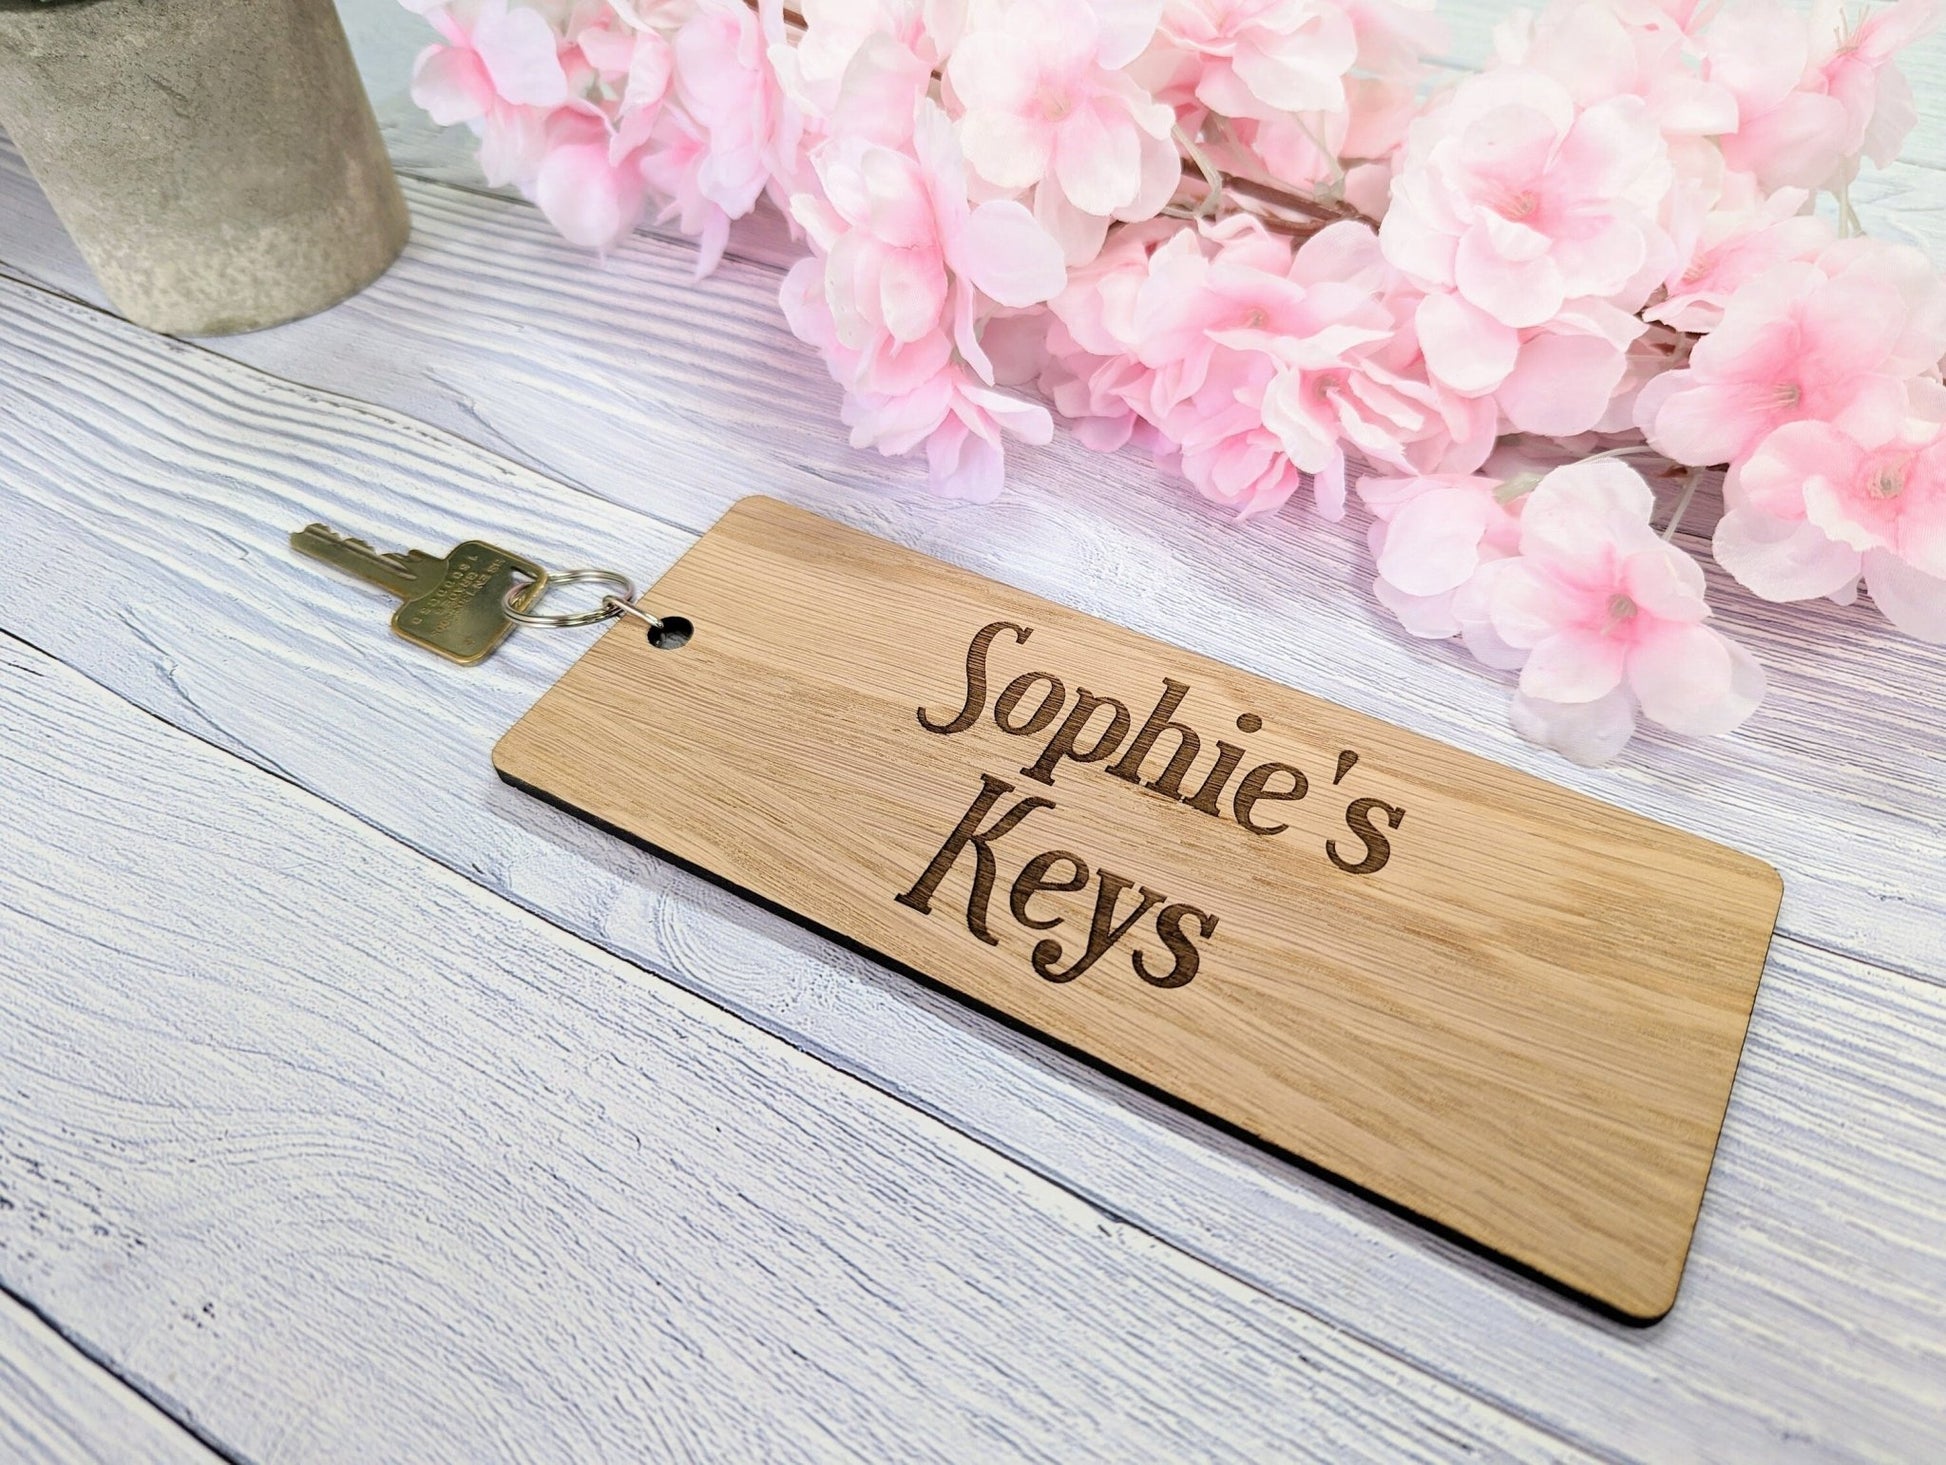 Extra-Large 200x80mm Personalised Wooden Keyring - Ideal for First Car, New Home, or Those Who Misplace Keys - CherryGroveCraft